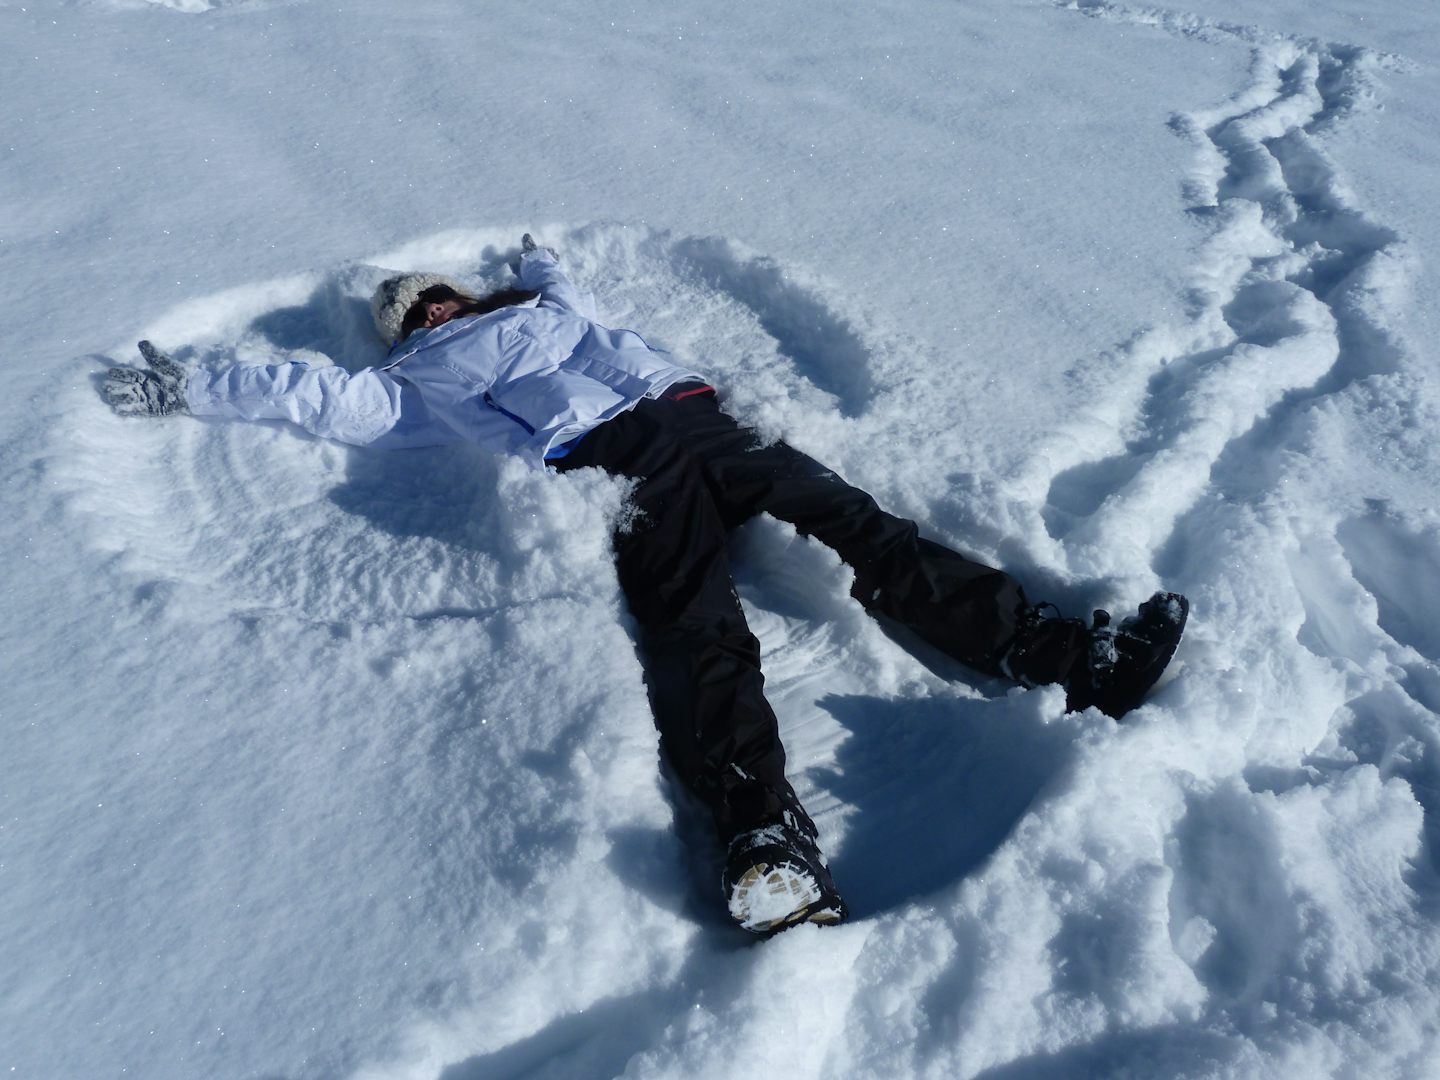 Wife just had to make a snow angel,after 7 inches of fresh powder snow.